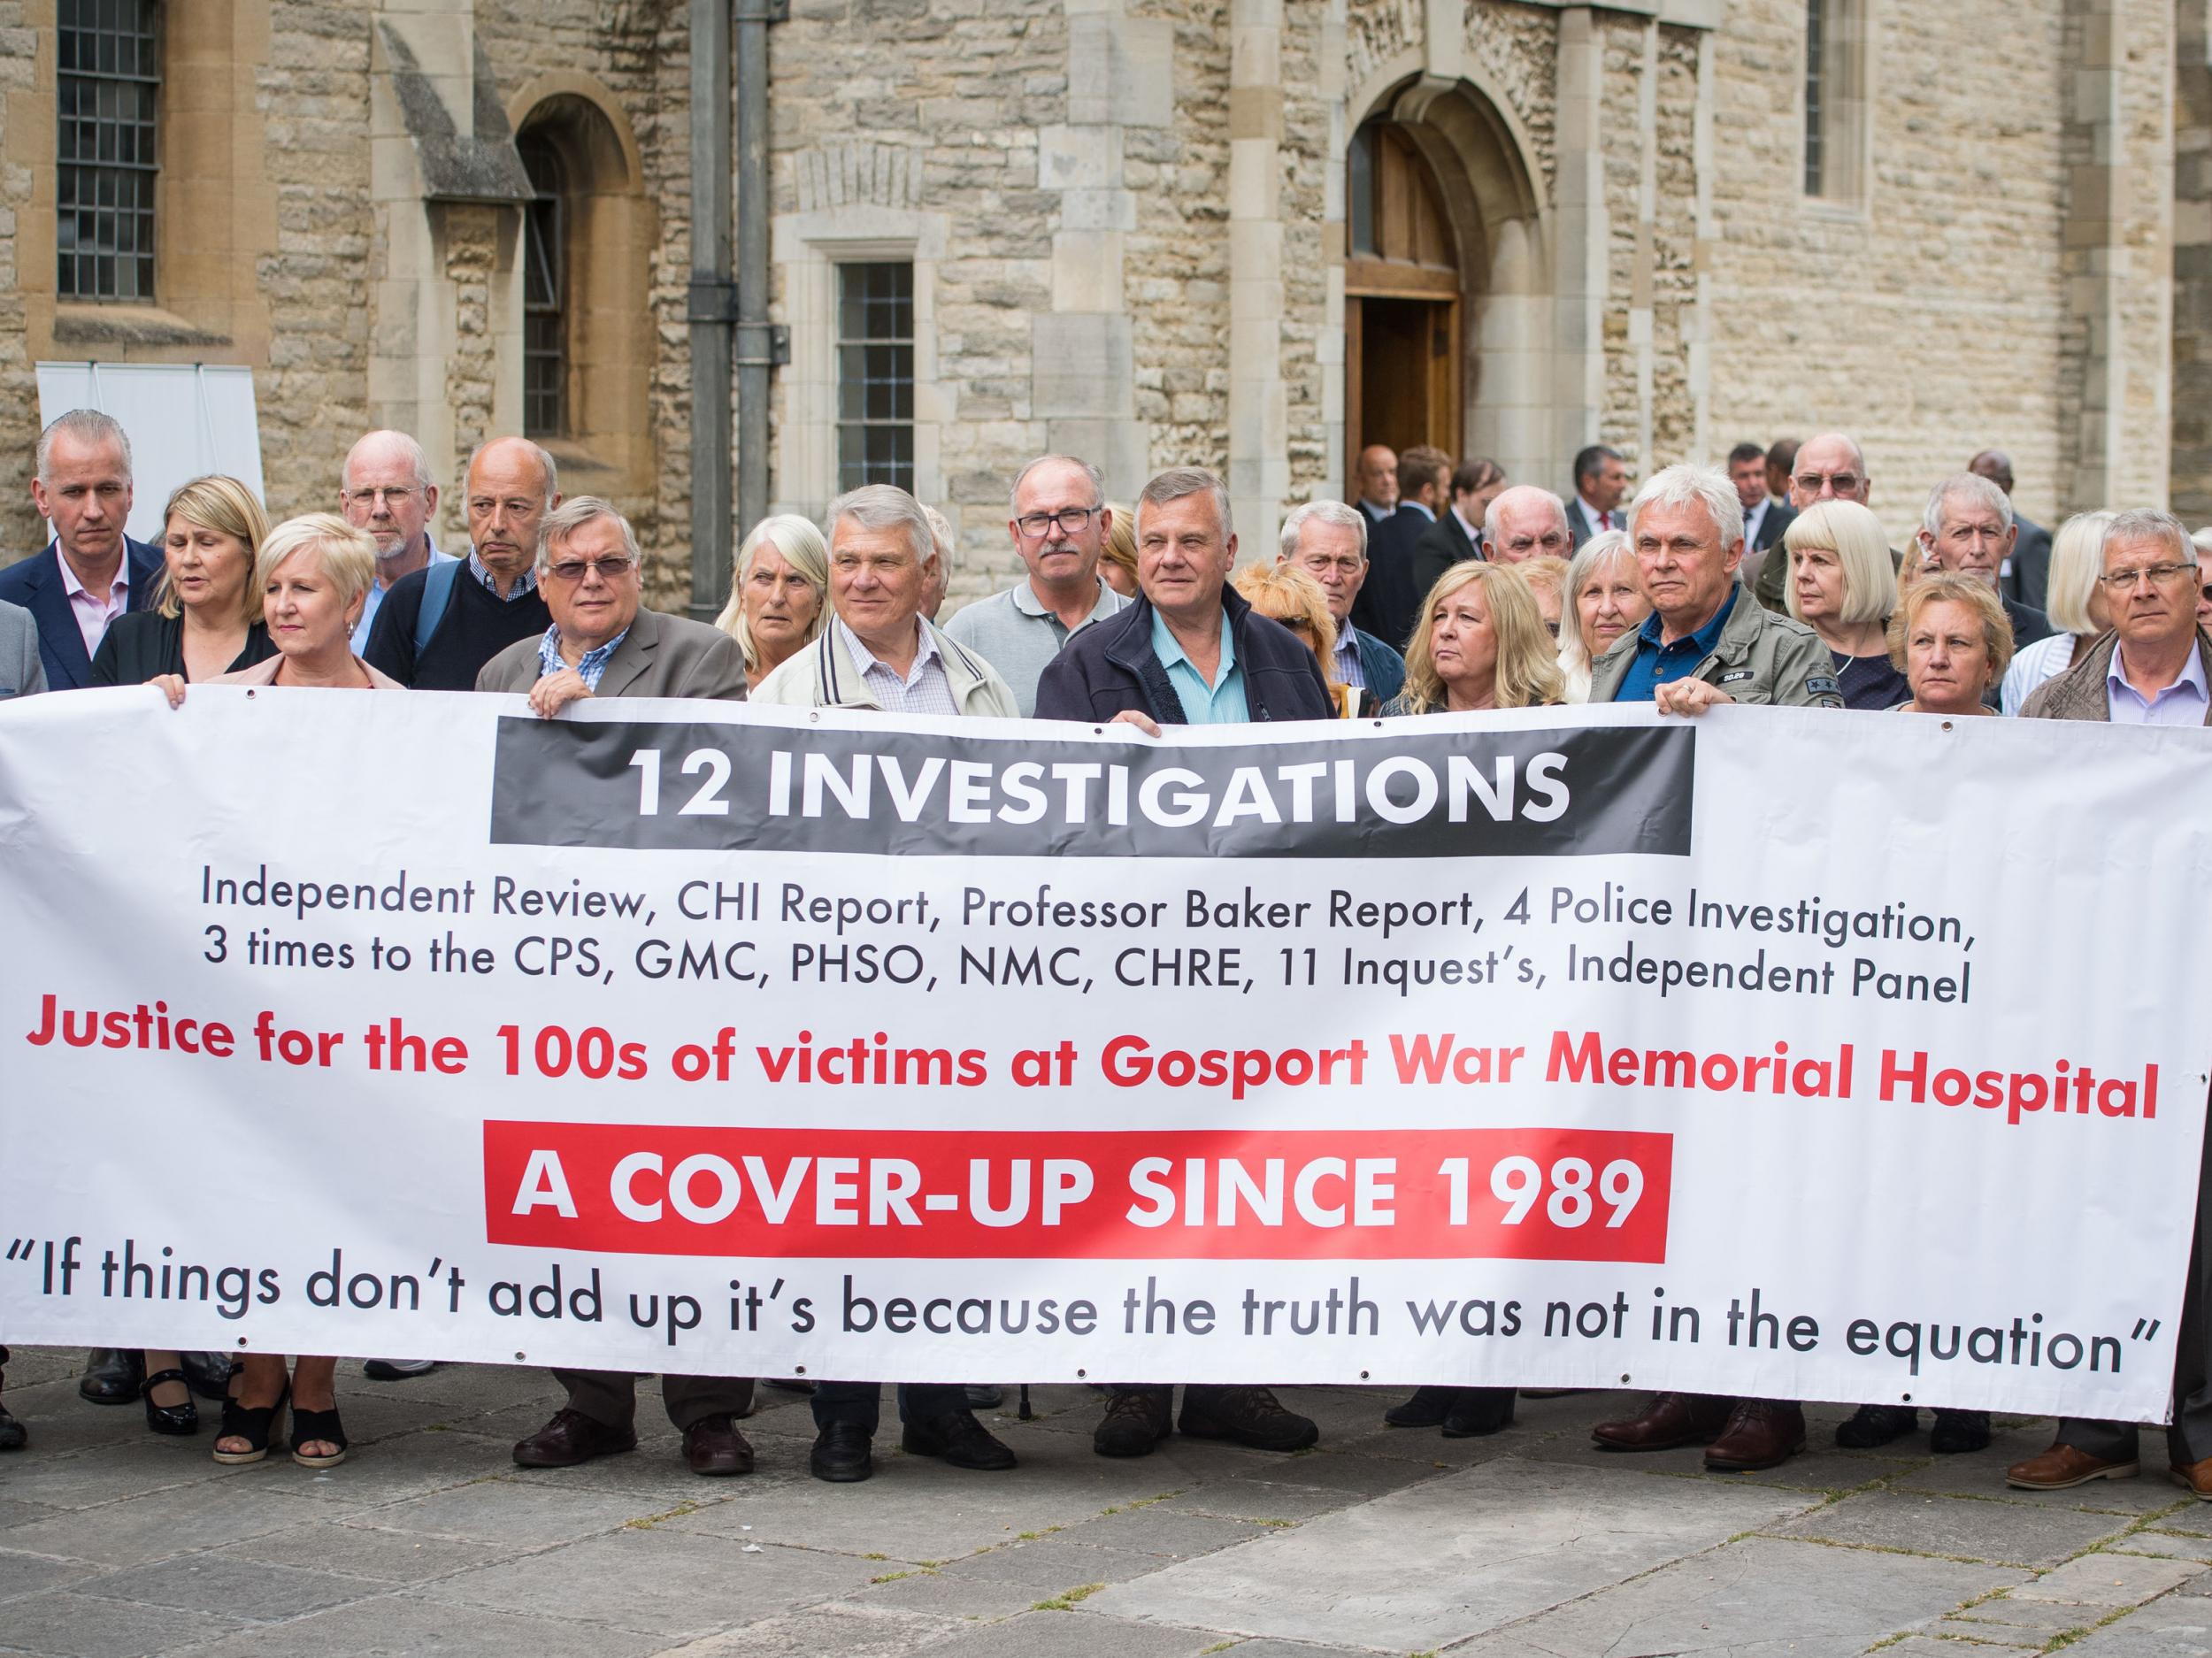 Families have seen successive investigations 'covered up' since their